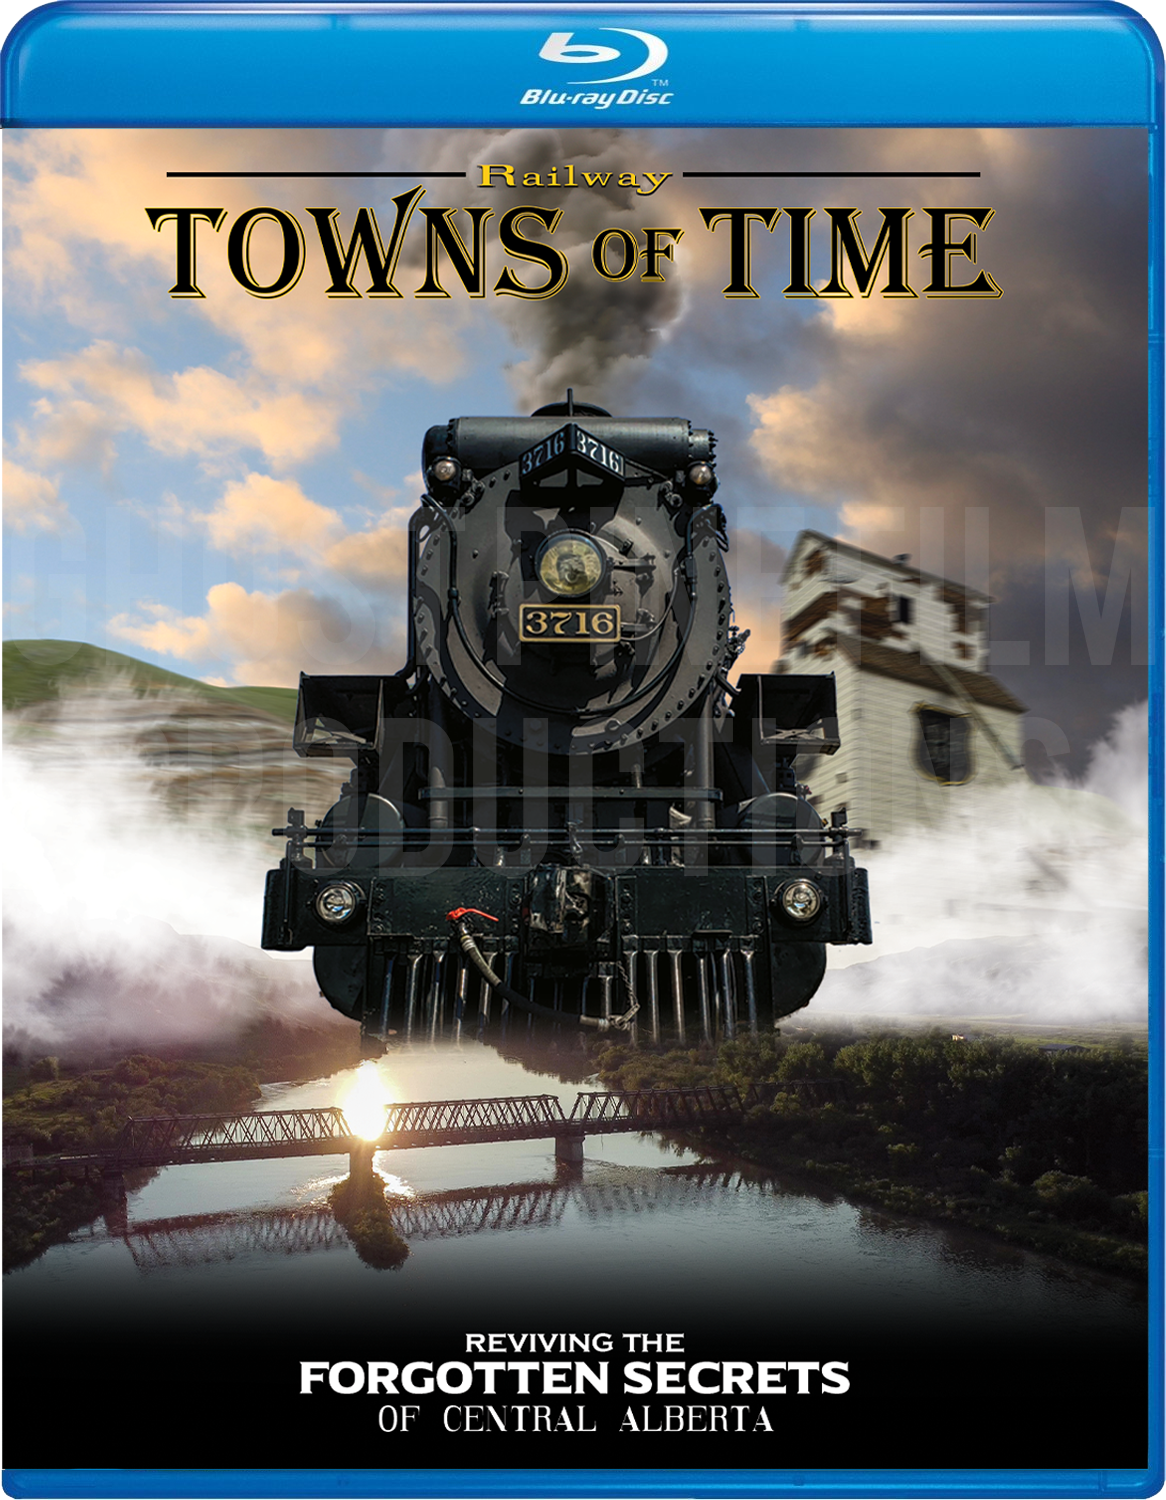 Canadian Pacific "Railway Towns of Time"-Ghost Pine Films Production Blu-Ray DVD Без бренда GPF-10-0001